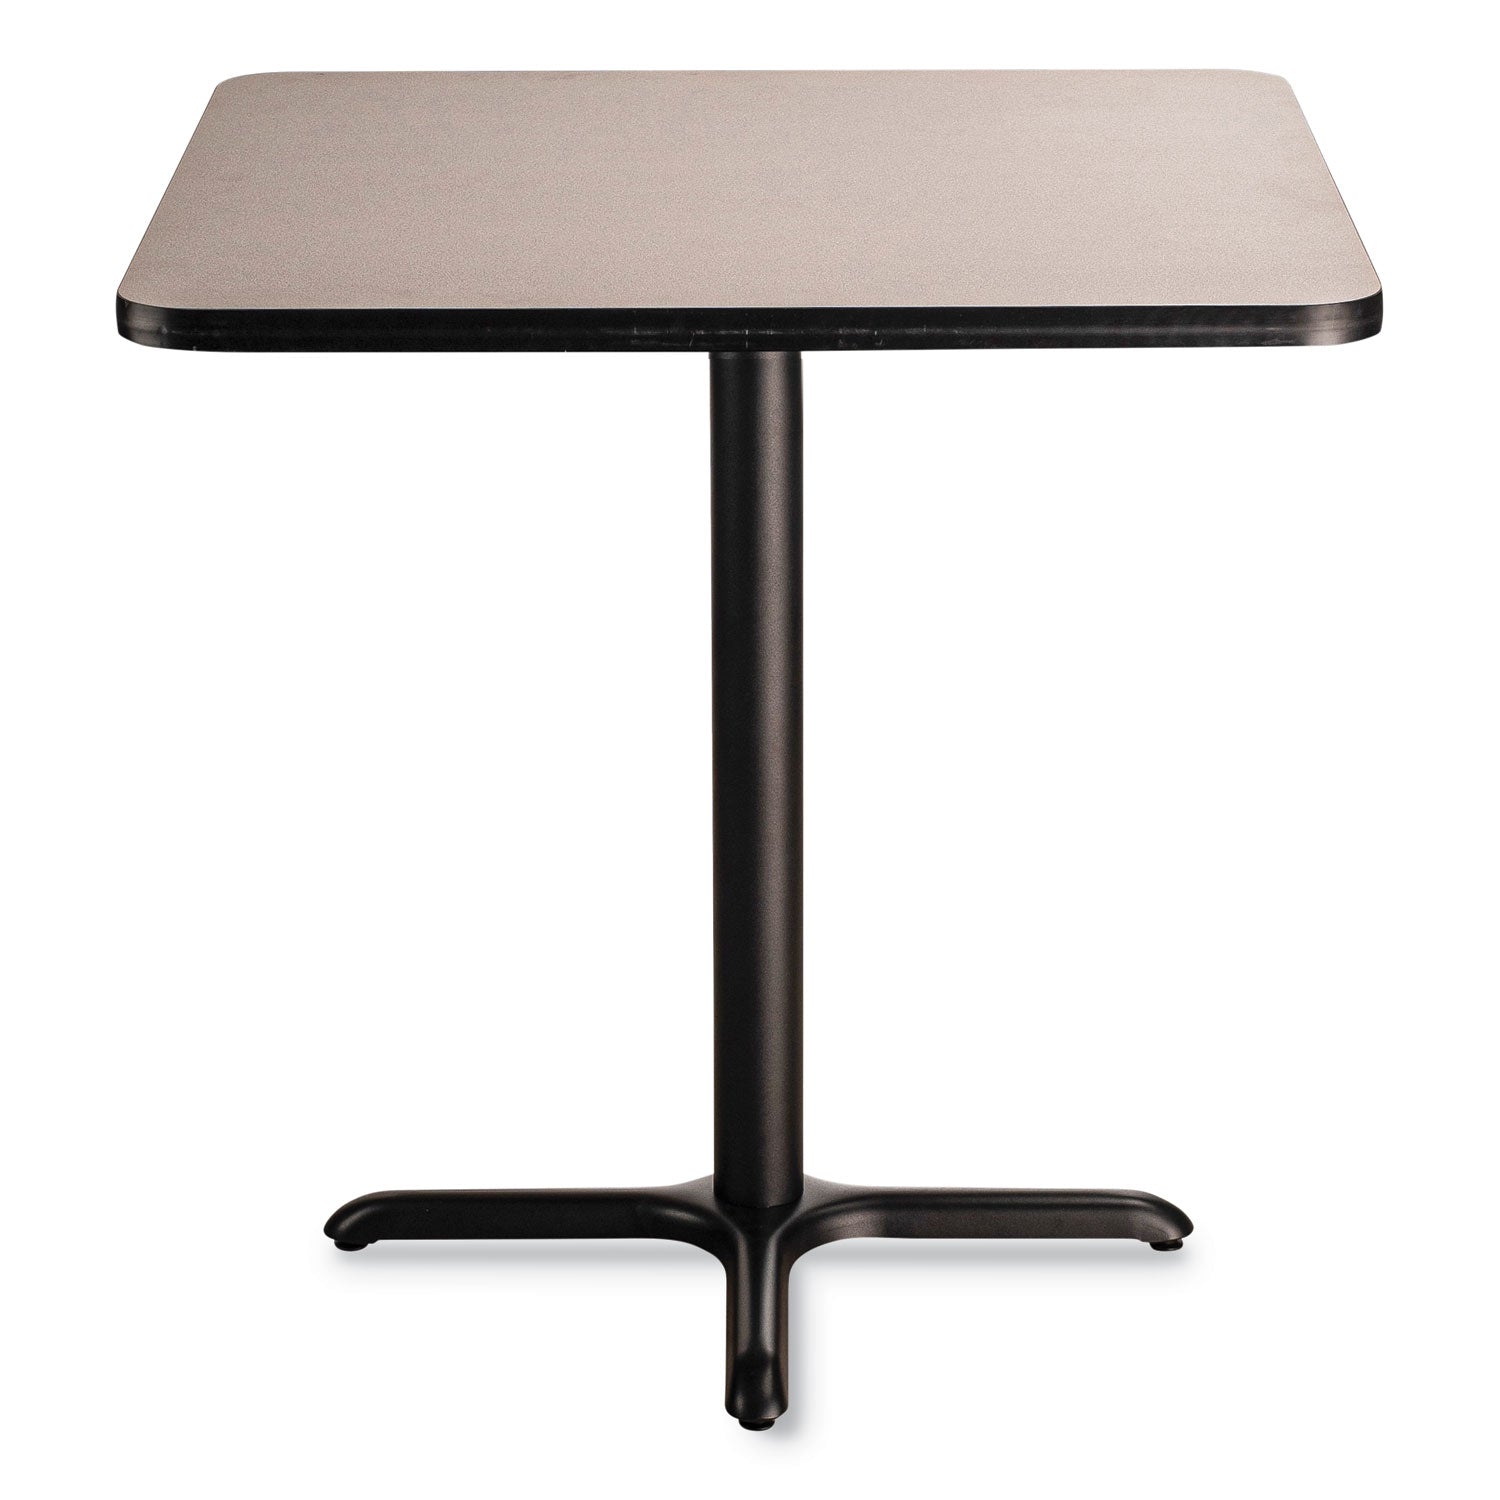 cafe-table-36w-x-36d-x-36h-square-top-x-base-gray-nebula-top-black-base-ships-in-7-10-business-days_npsct33636xc1gy - 2